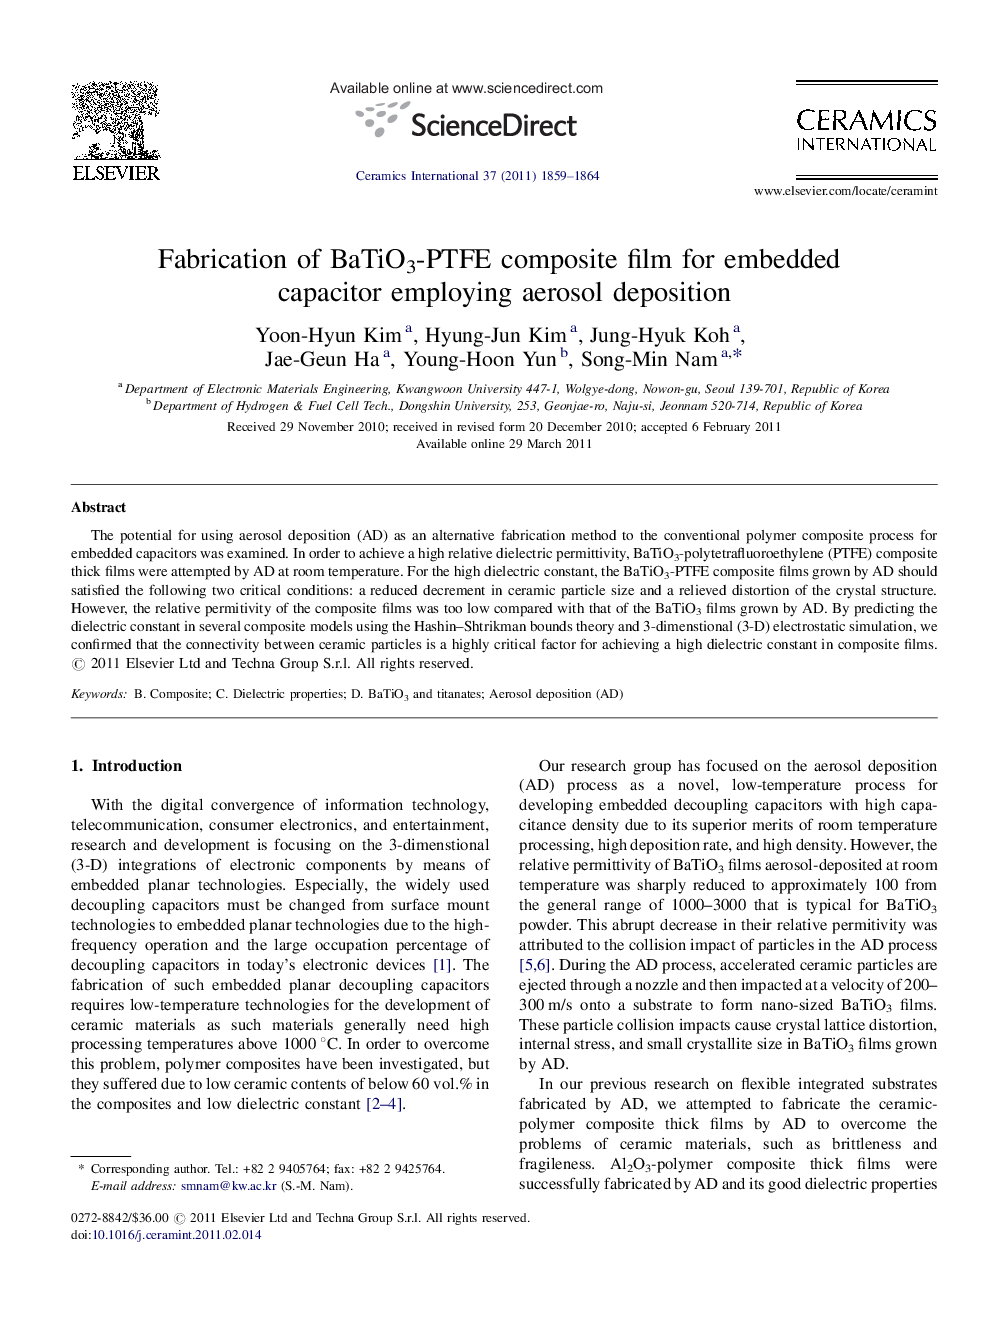 Fabrication of BaTiO3-PTFE composite film for embedded capacitor employing aerosol deposition